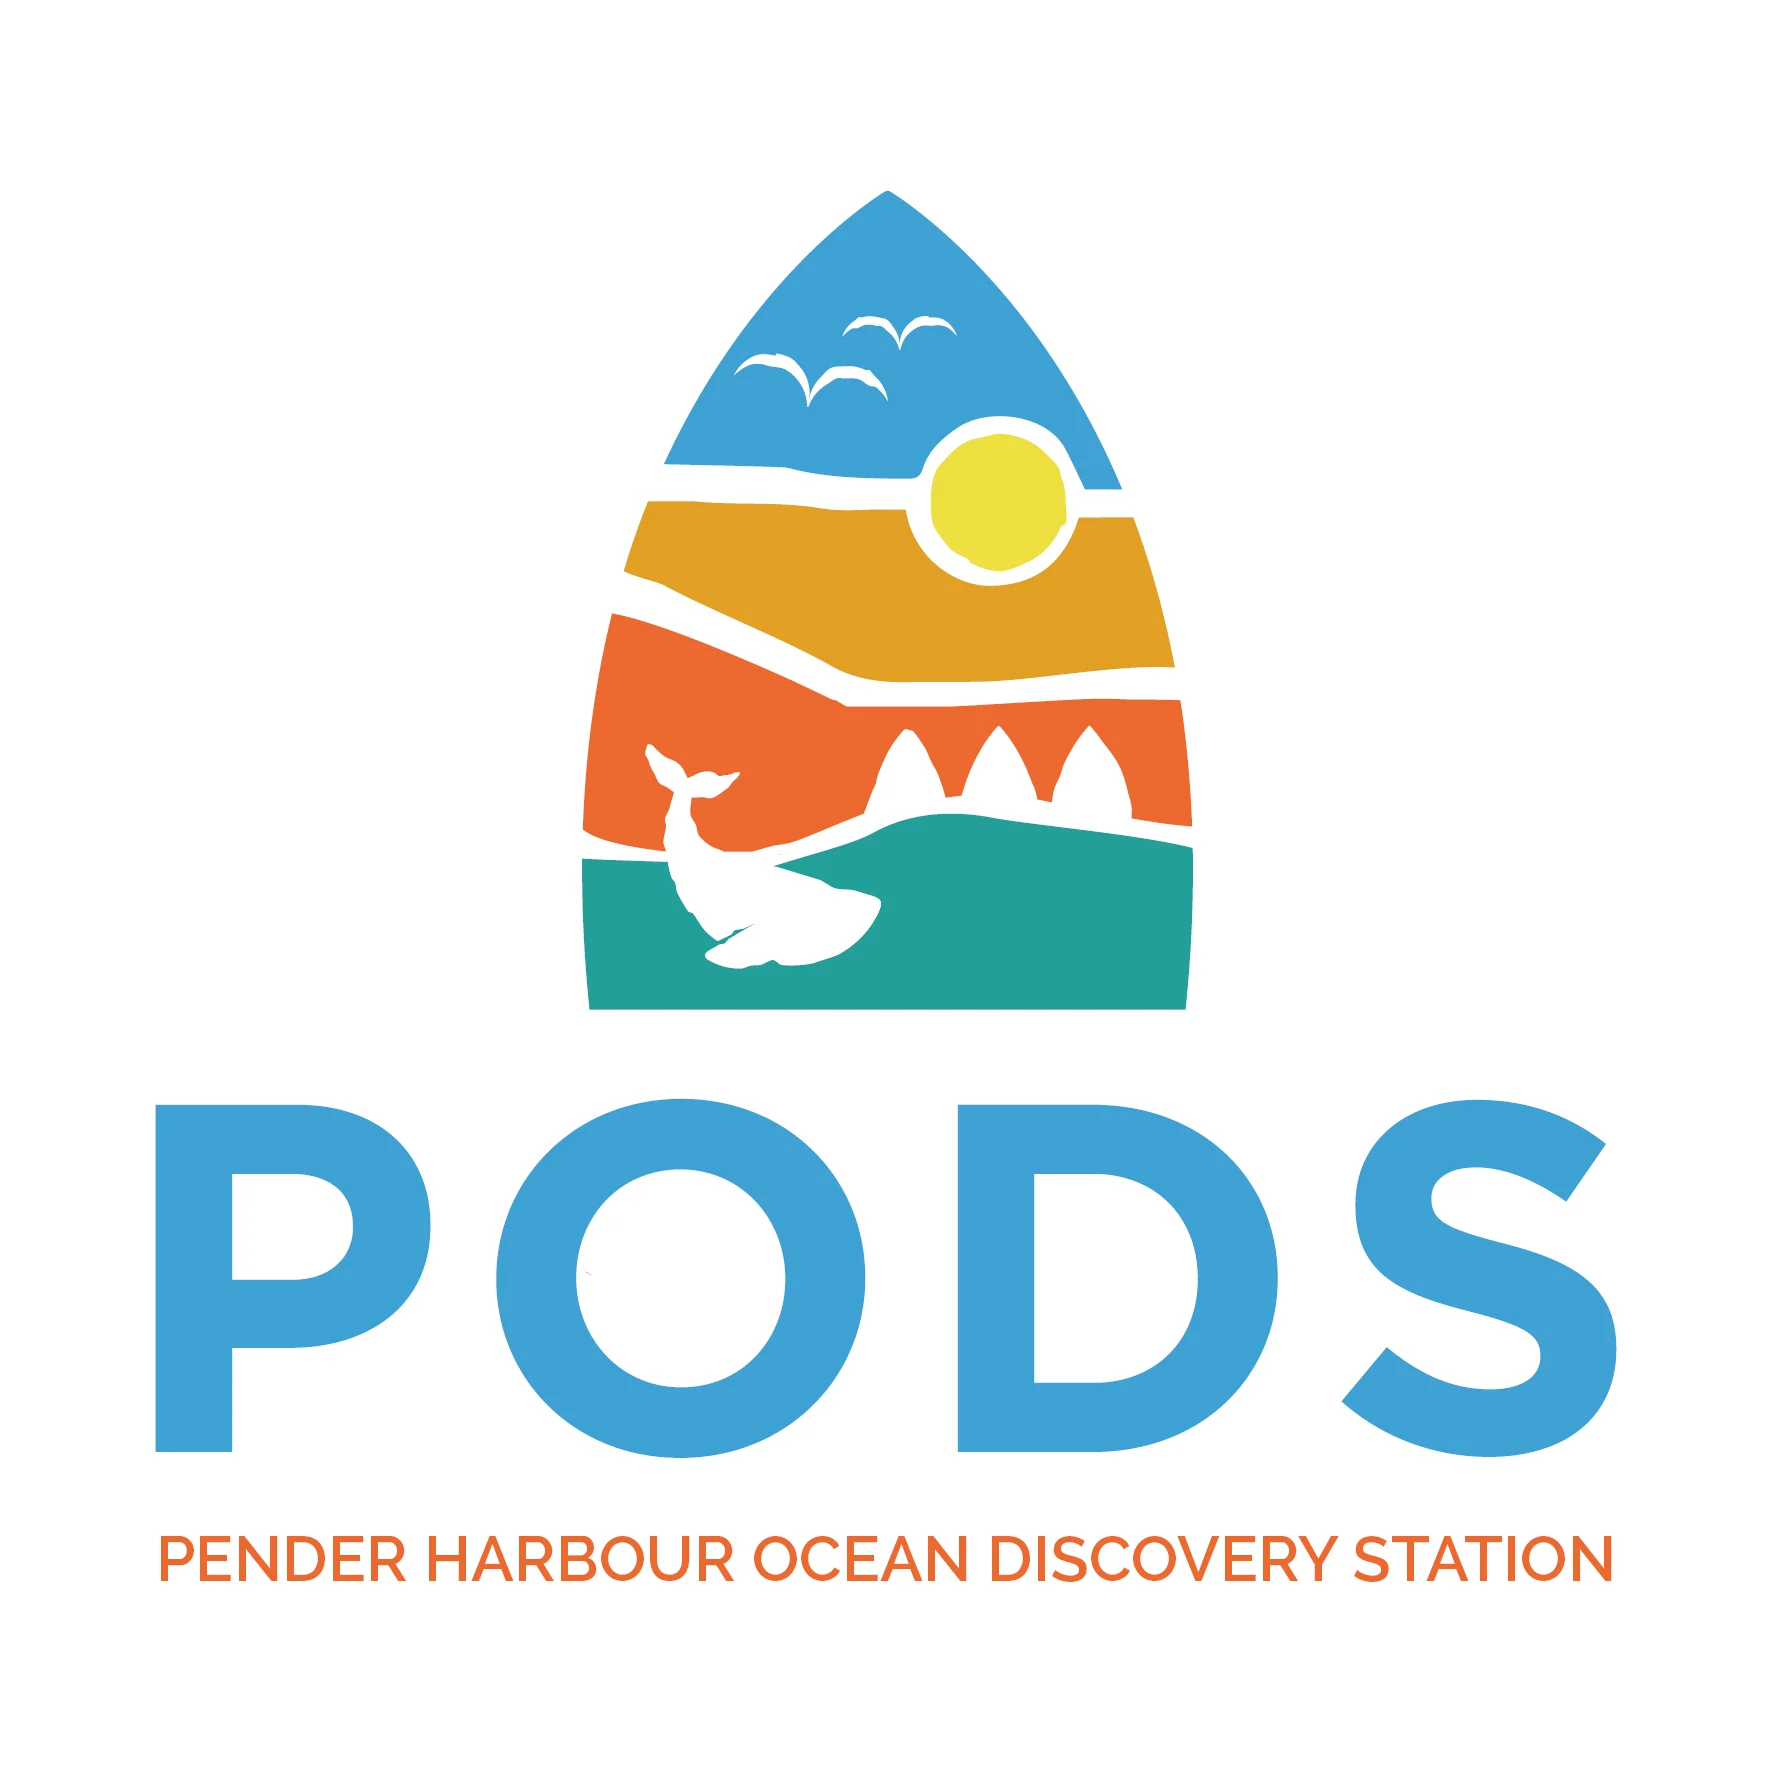 Pender Harbour Ocean Discovery Station logo